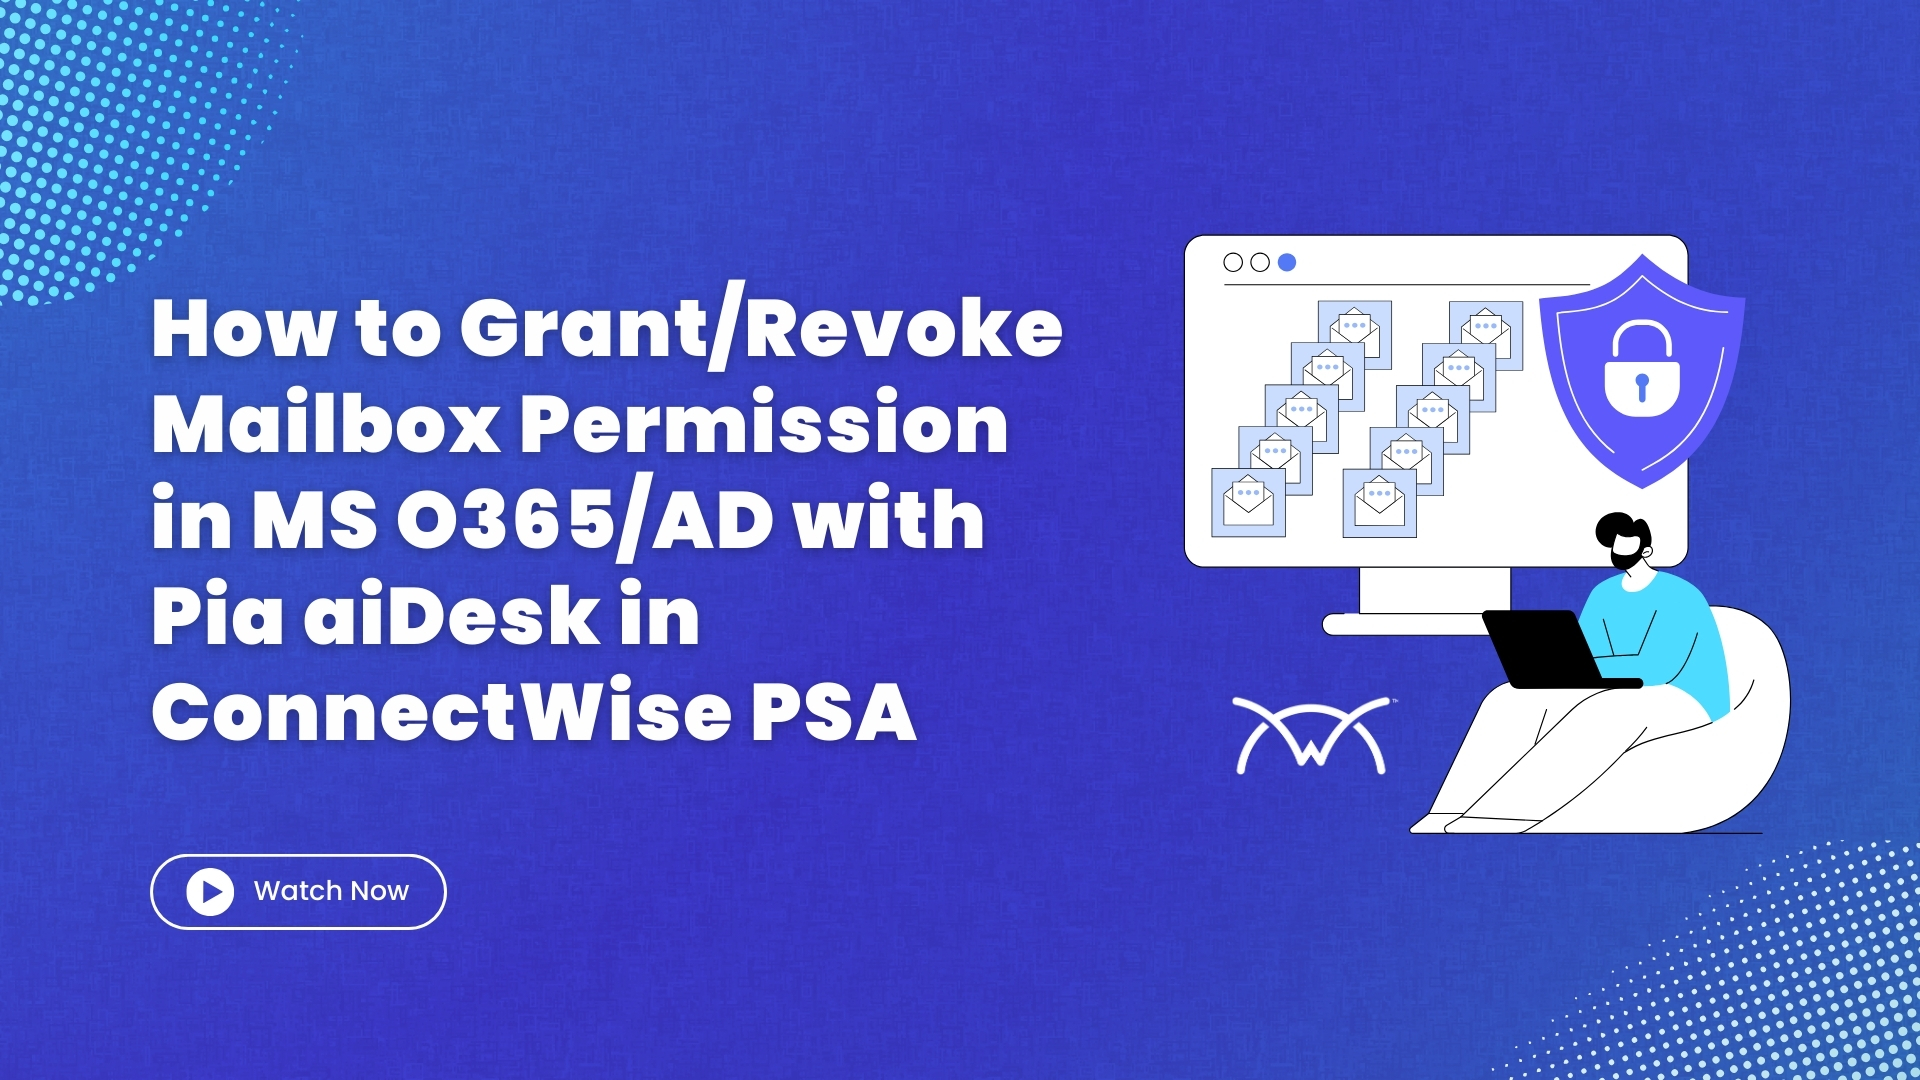 How to Grant Mailbox Permission in Bulk in MS O365AD with Pia aiDesk in ConnectWise PSA